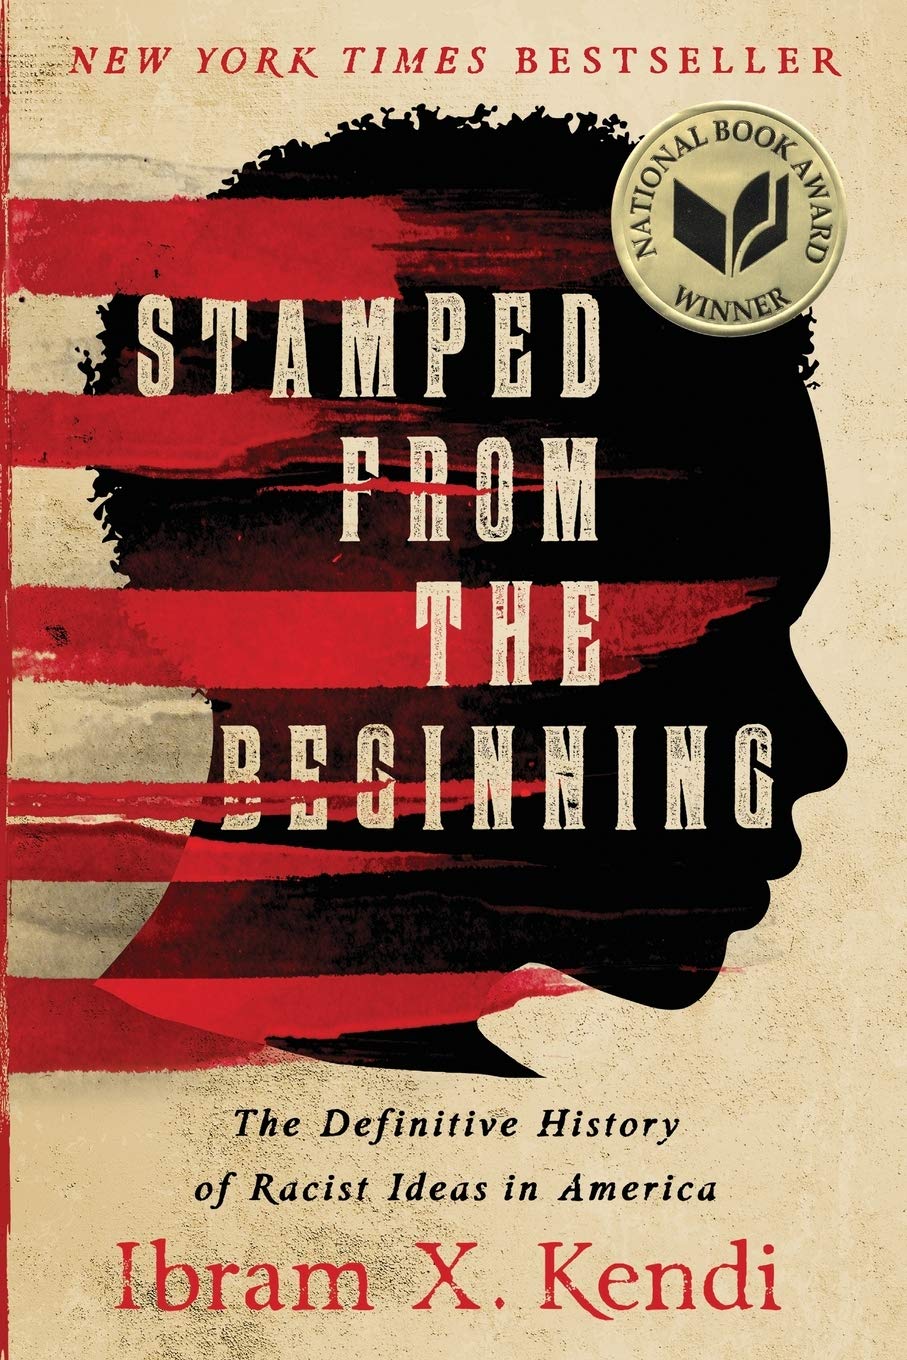 'Stamped From the Beginning' by Ibram X. Kendi